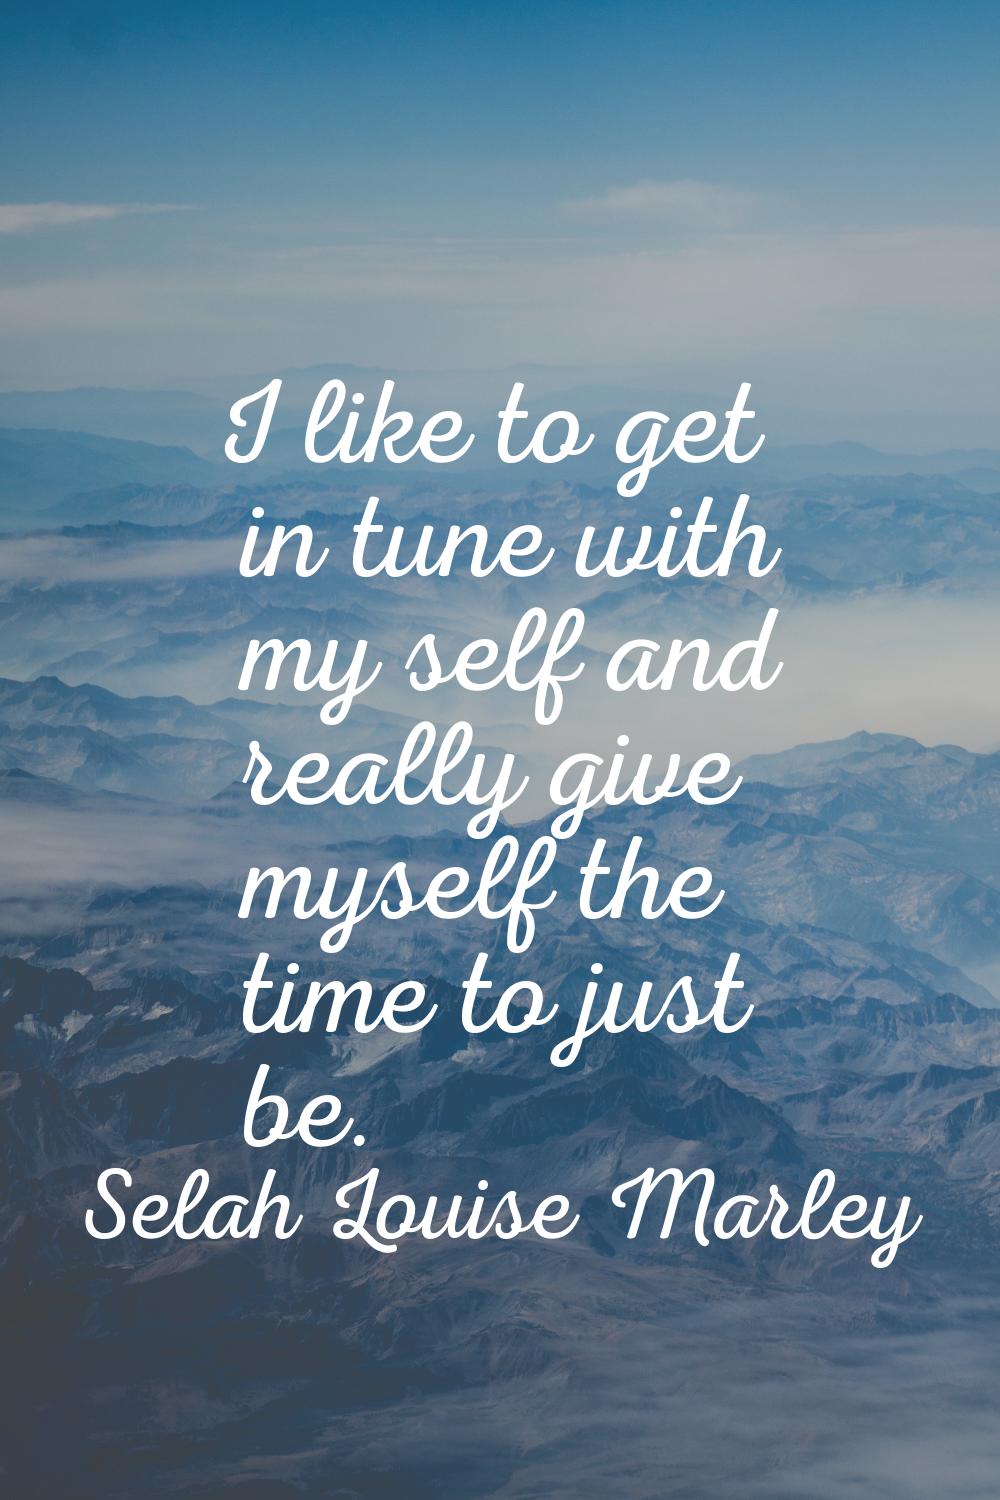 I like to get in tune with my self and really give myself the time to just be.